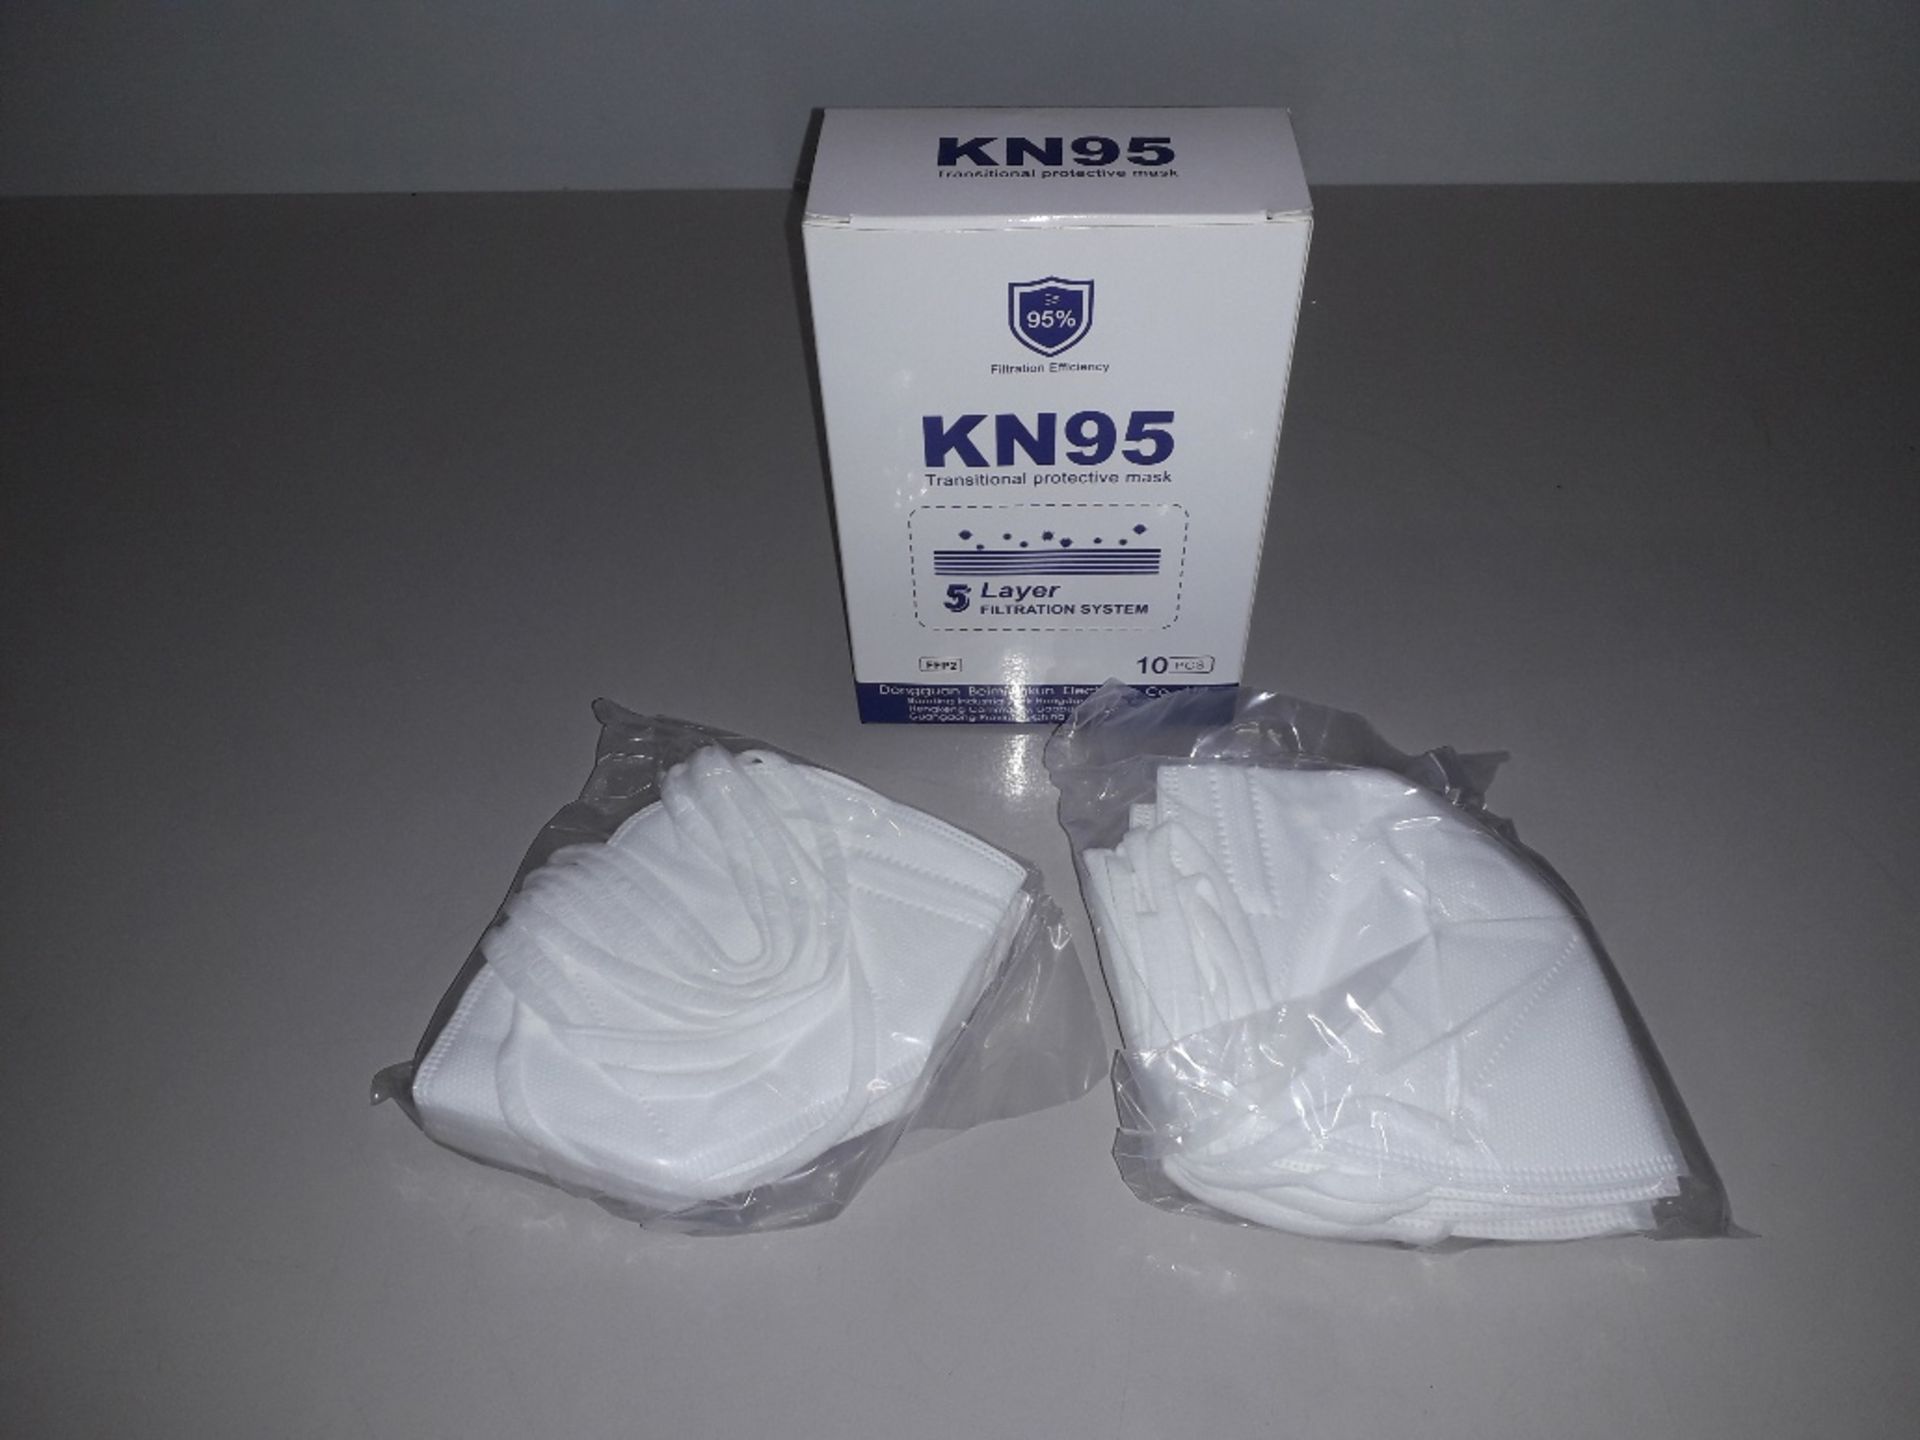 200 X BRAND NEW BOXED KN95 TRANSITIONAL PROTECTIVE MASK WITH 5 LAYER FILTRATION SYSTEM - IN 20 INNER